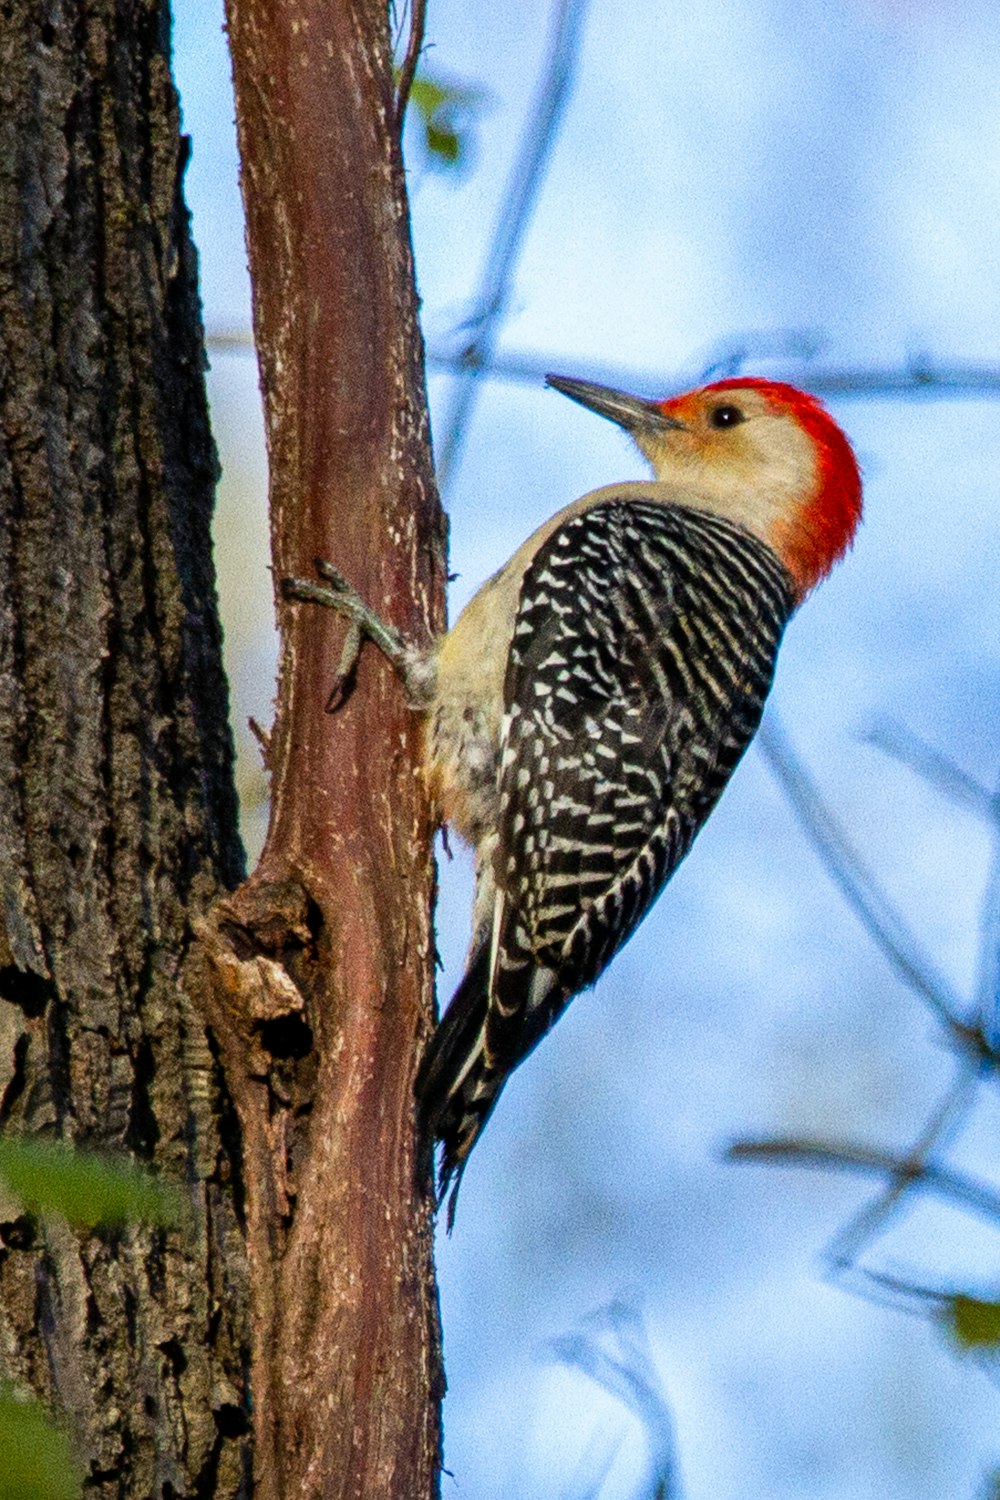 red white and black bird perched on brown tree branch